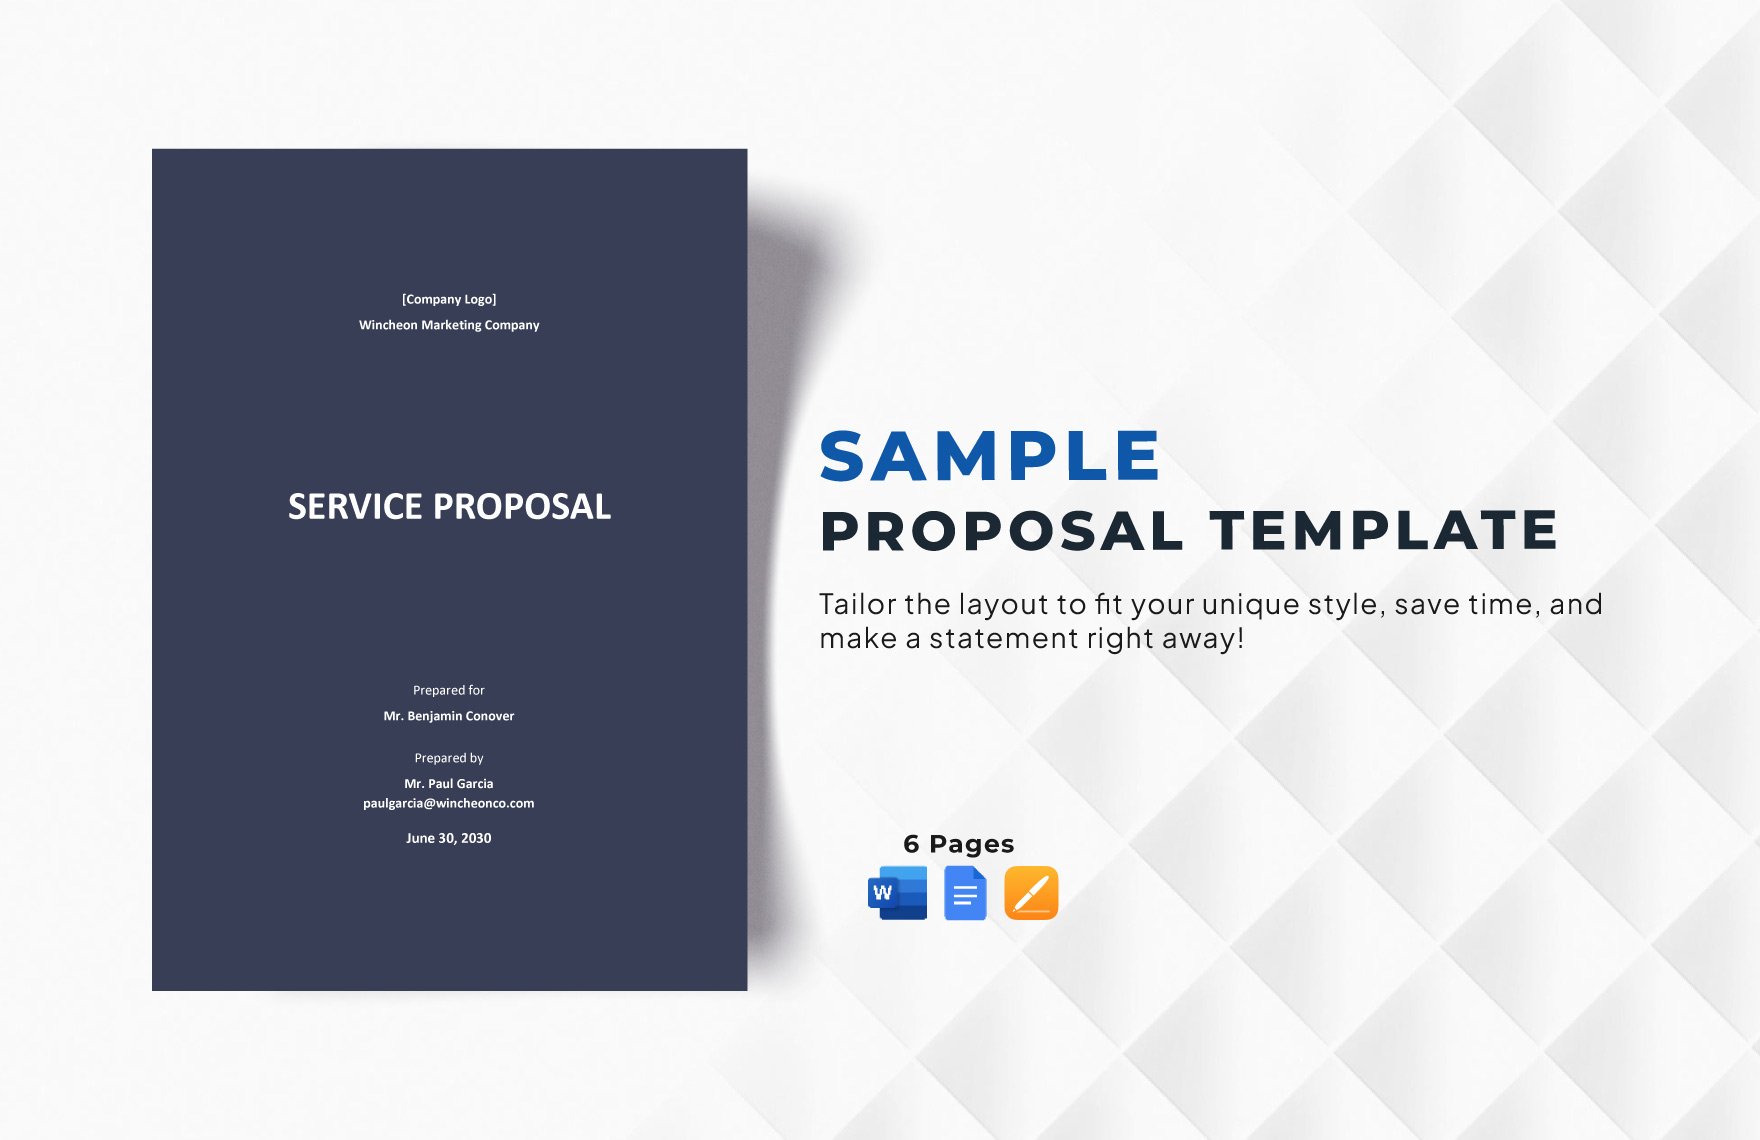 Sample Proposal Template in Word, Google Docs, Apple Pages